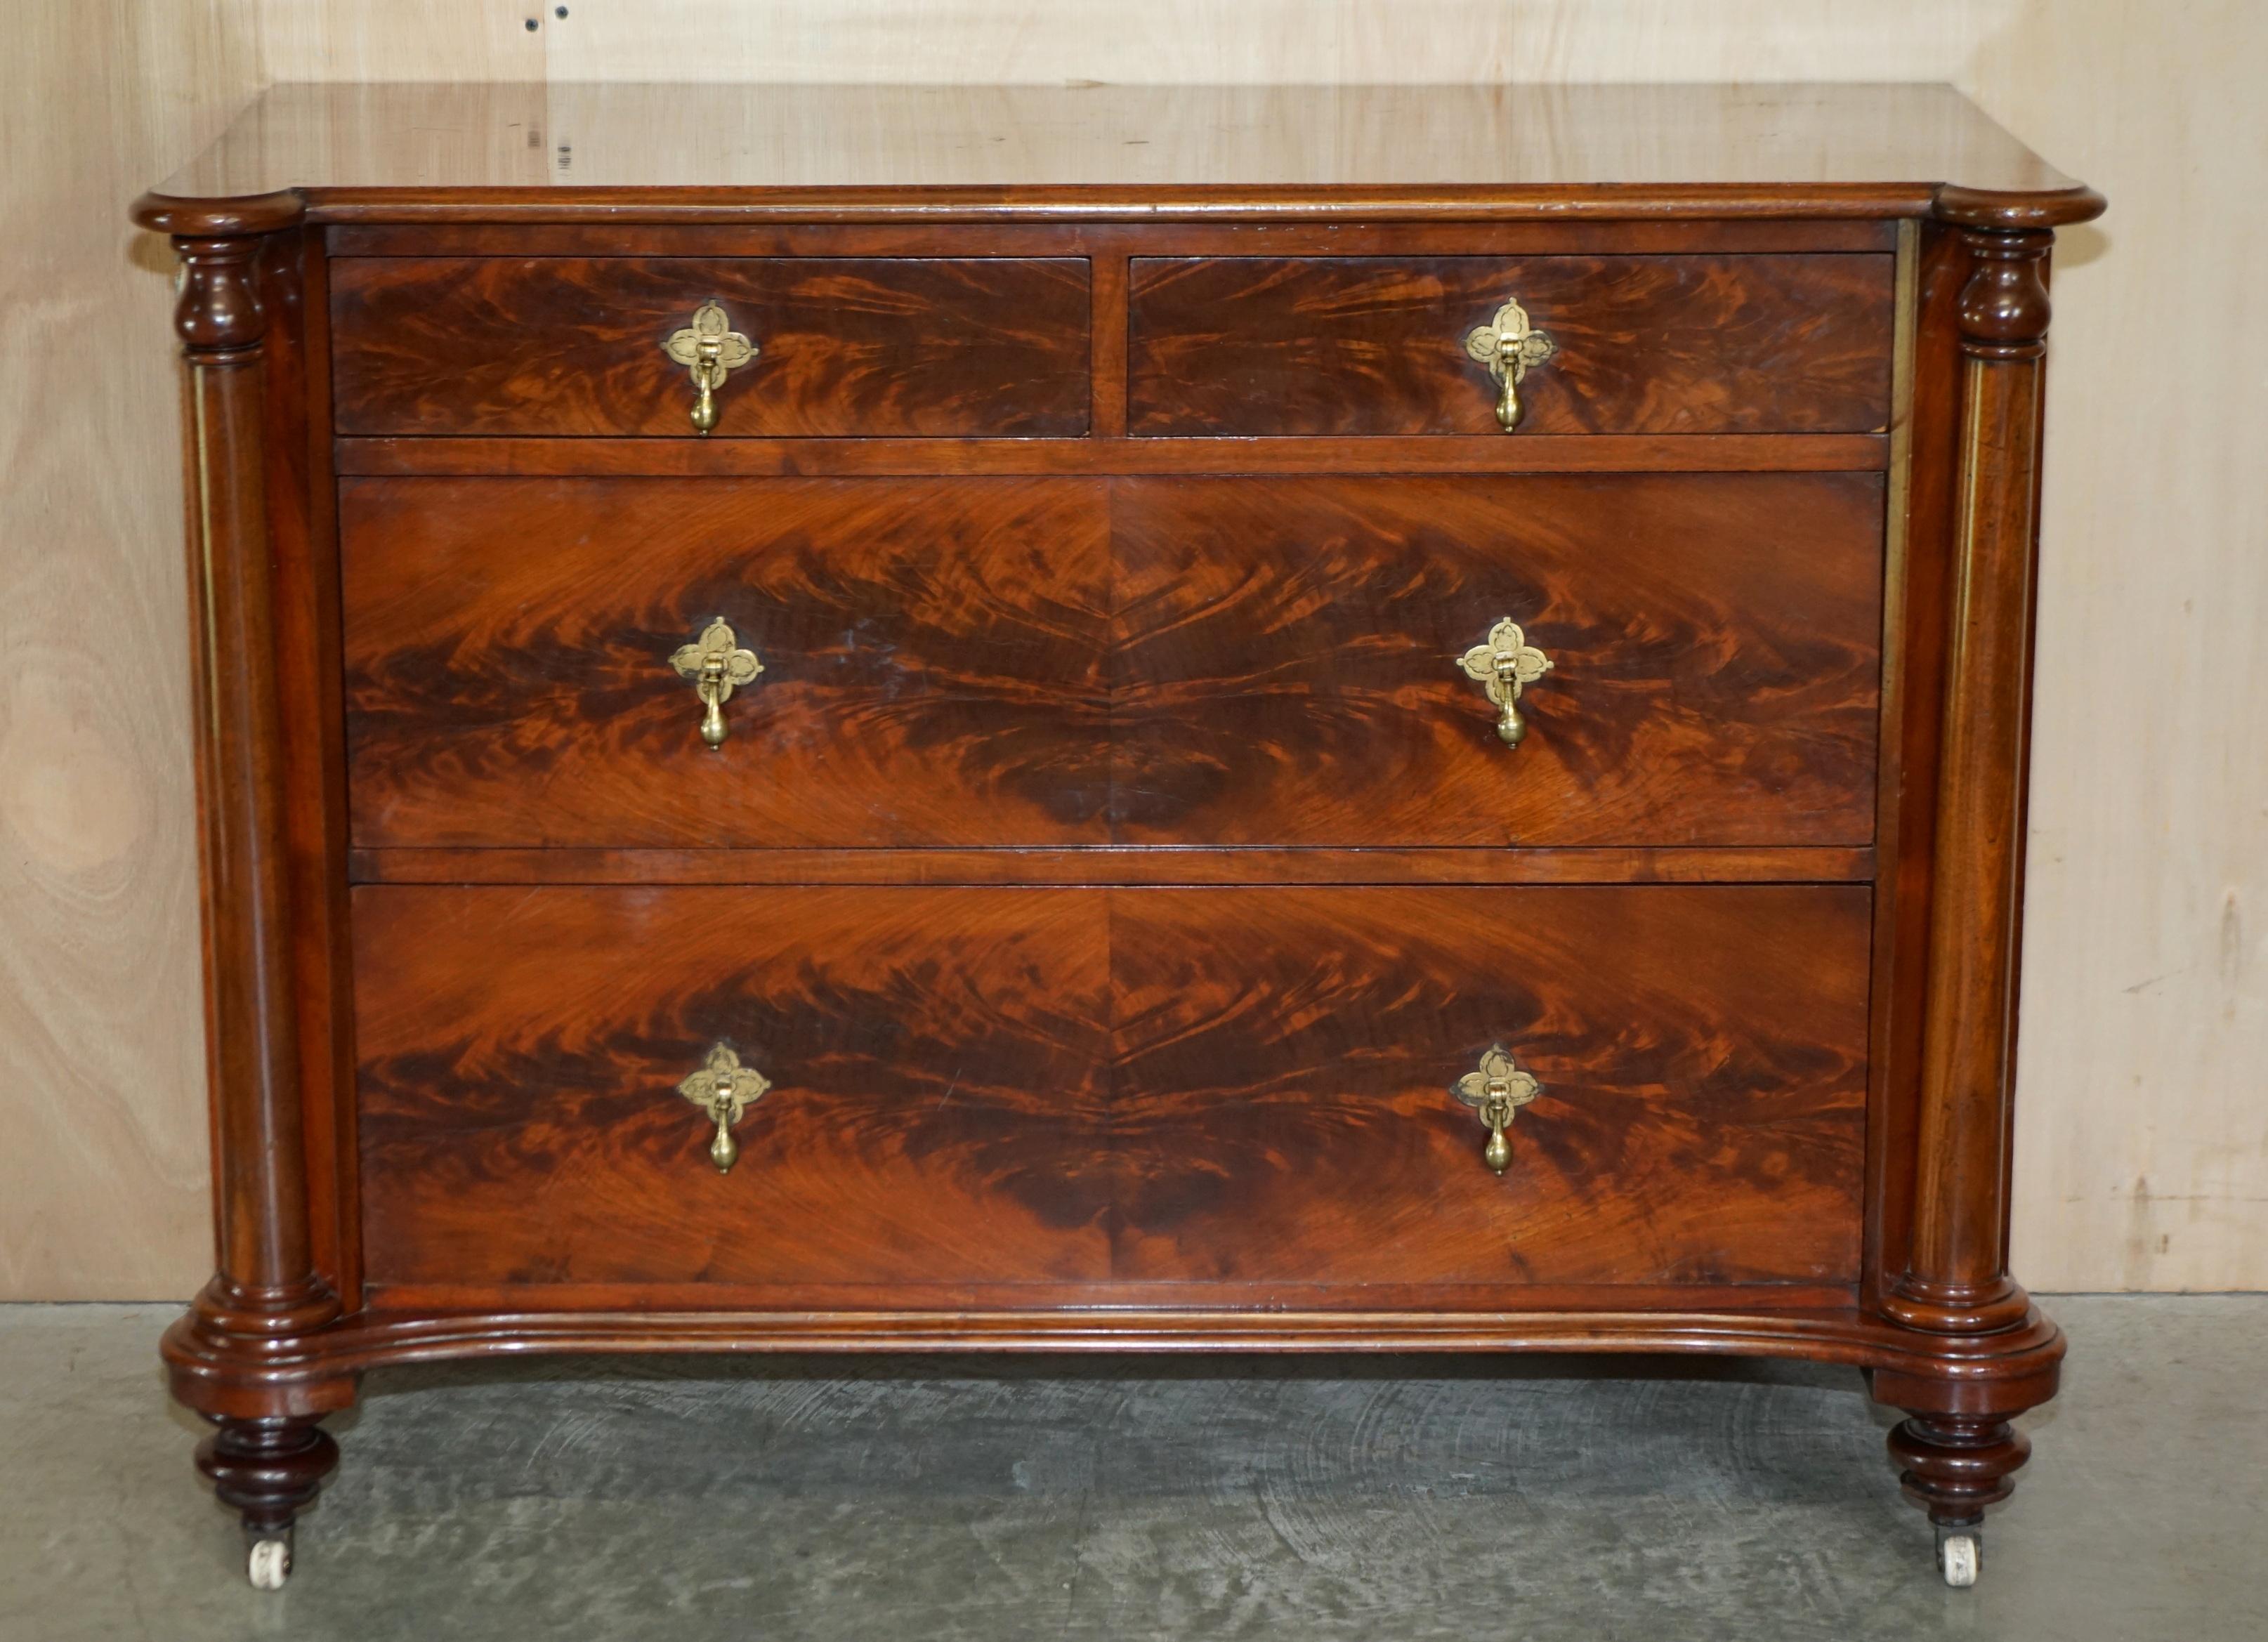 We are delighted to offer for sale this lovely absolutely exquisite, flamed mahogany, mid Victorian chest of drawers which sits on elegant turned legs finished with porcelain castors.

These drawers have a timber patina to die for, it is glorious